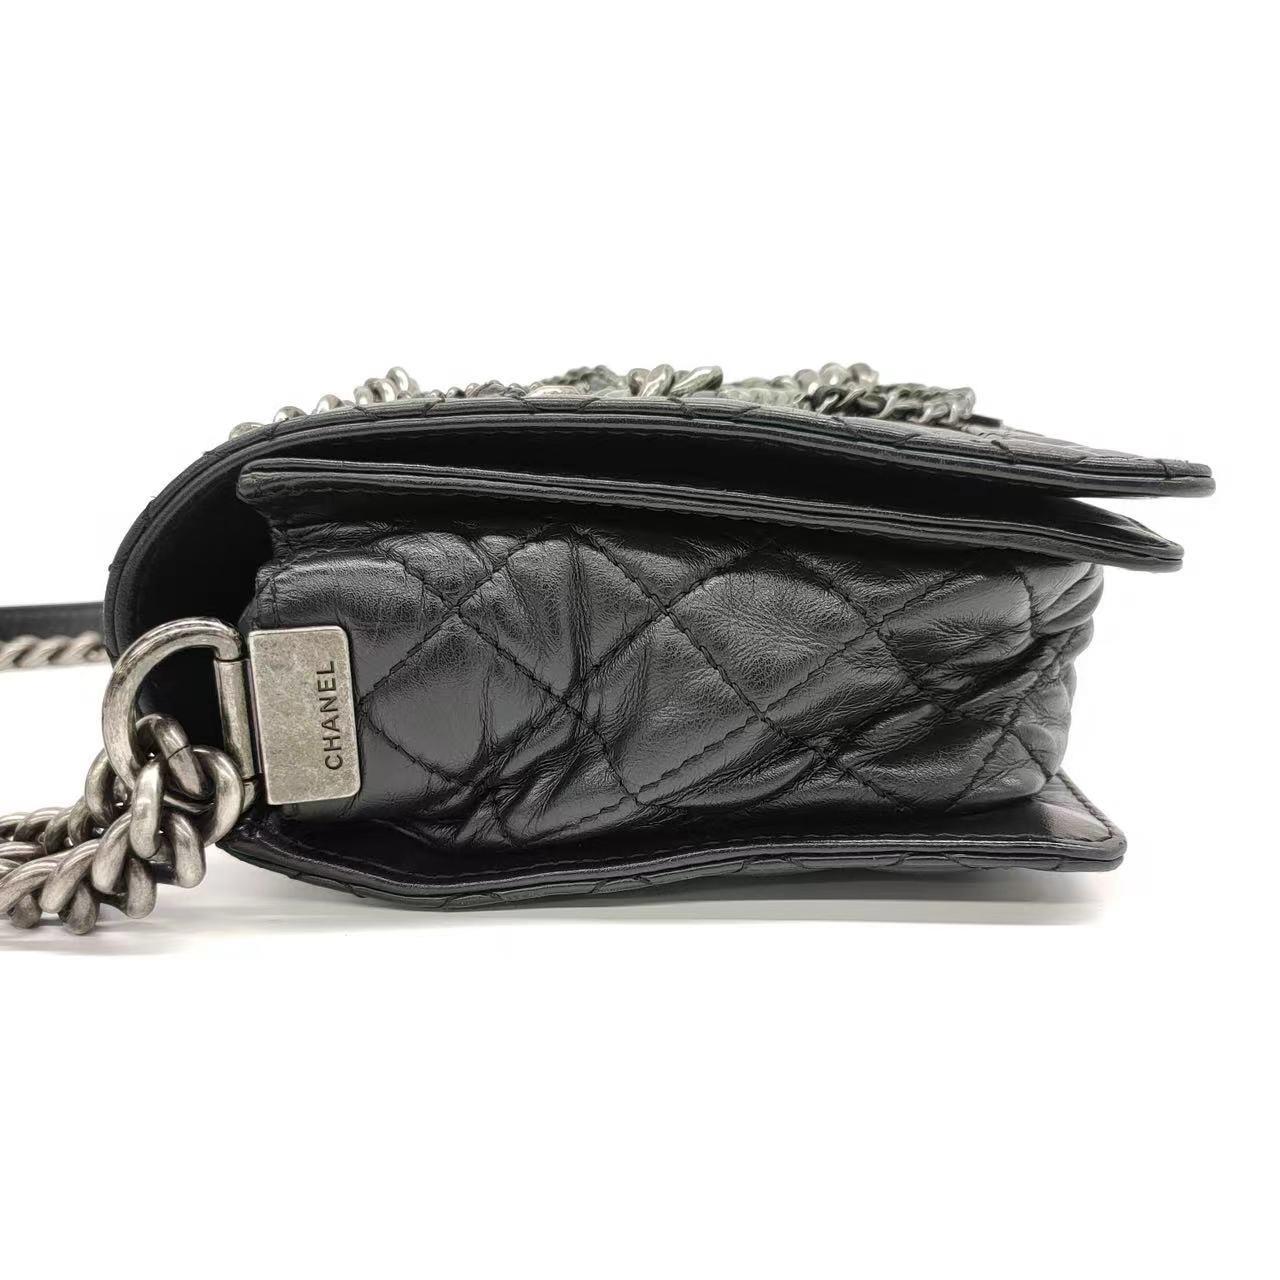 Chanel Enchained Boy Bag 2012 Black Leather Medium Flap Bag In Excellent Condition For Sale In AUBERVILLIERS, FR